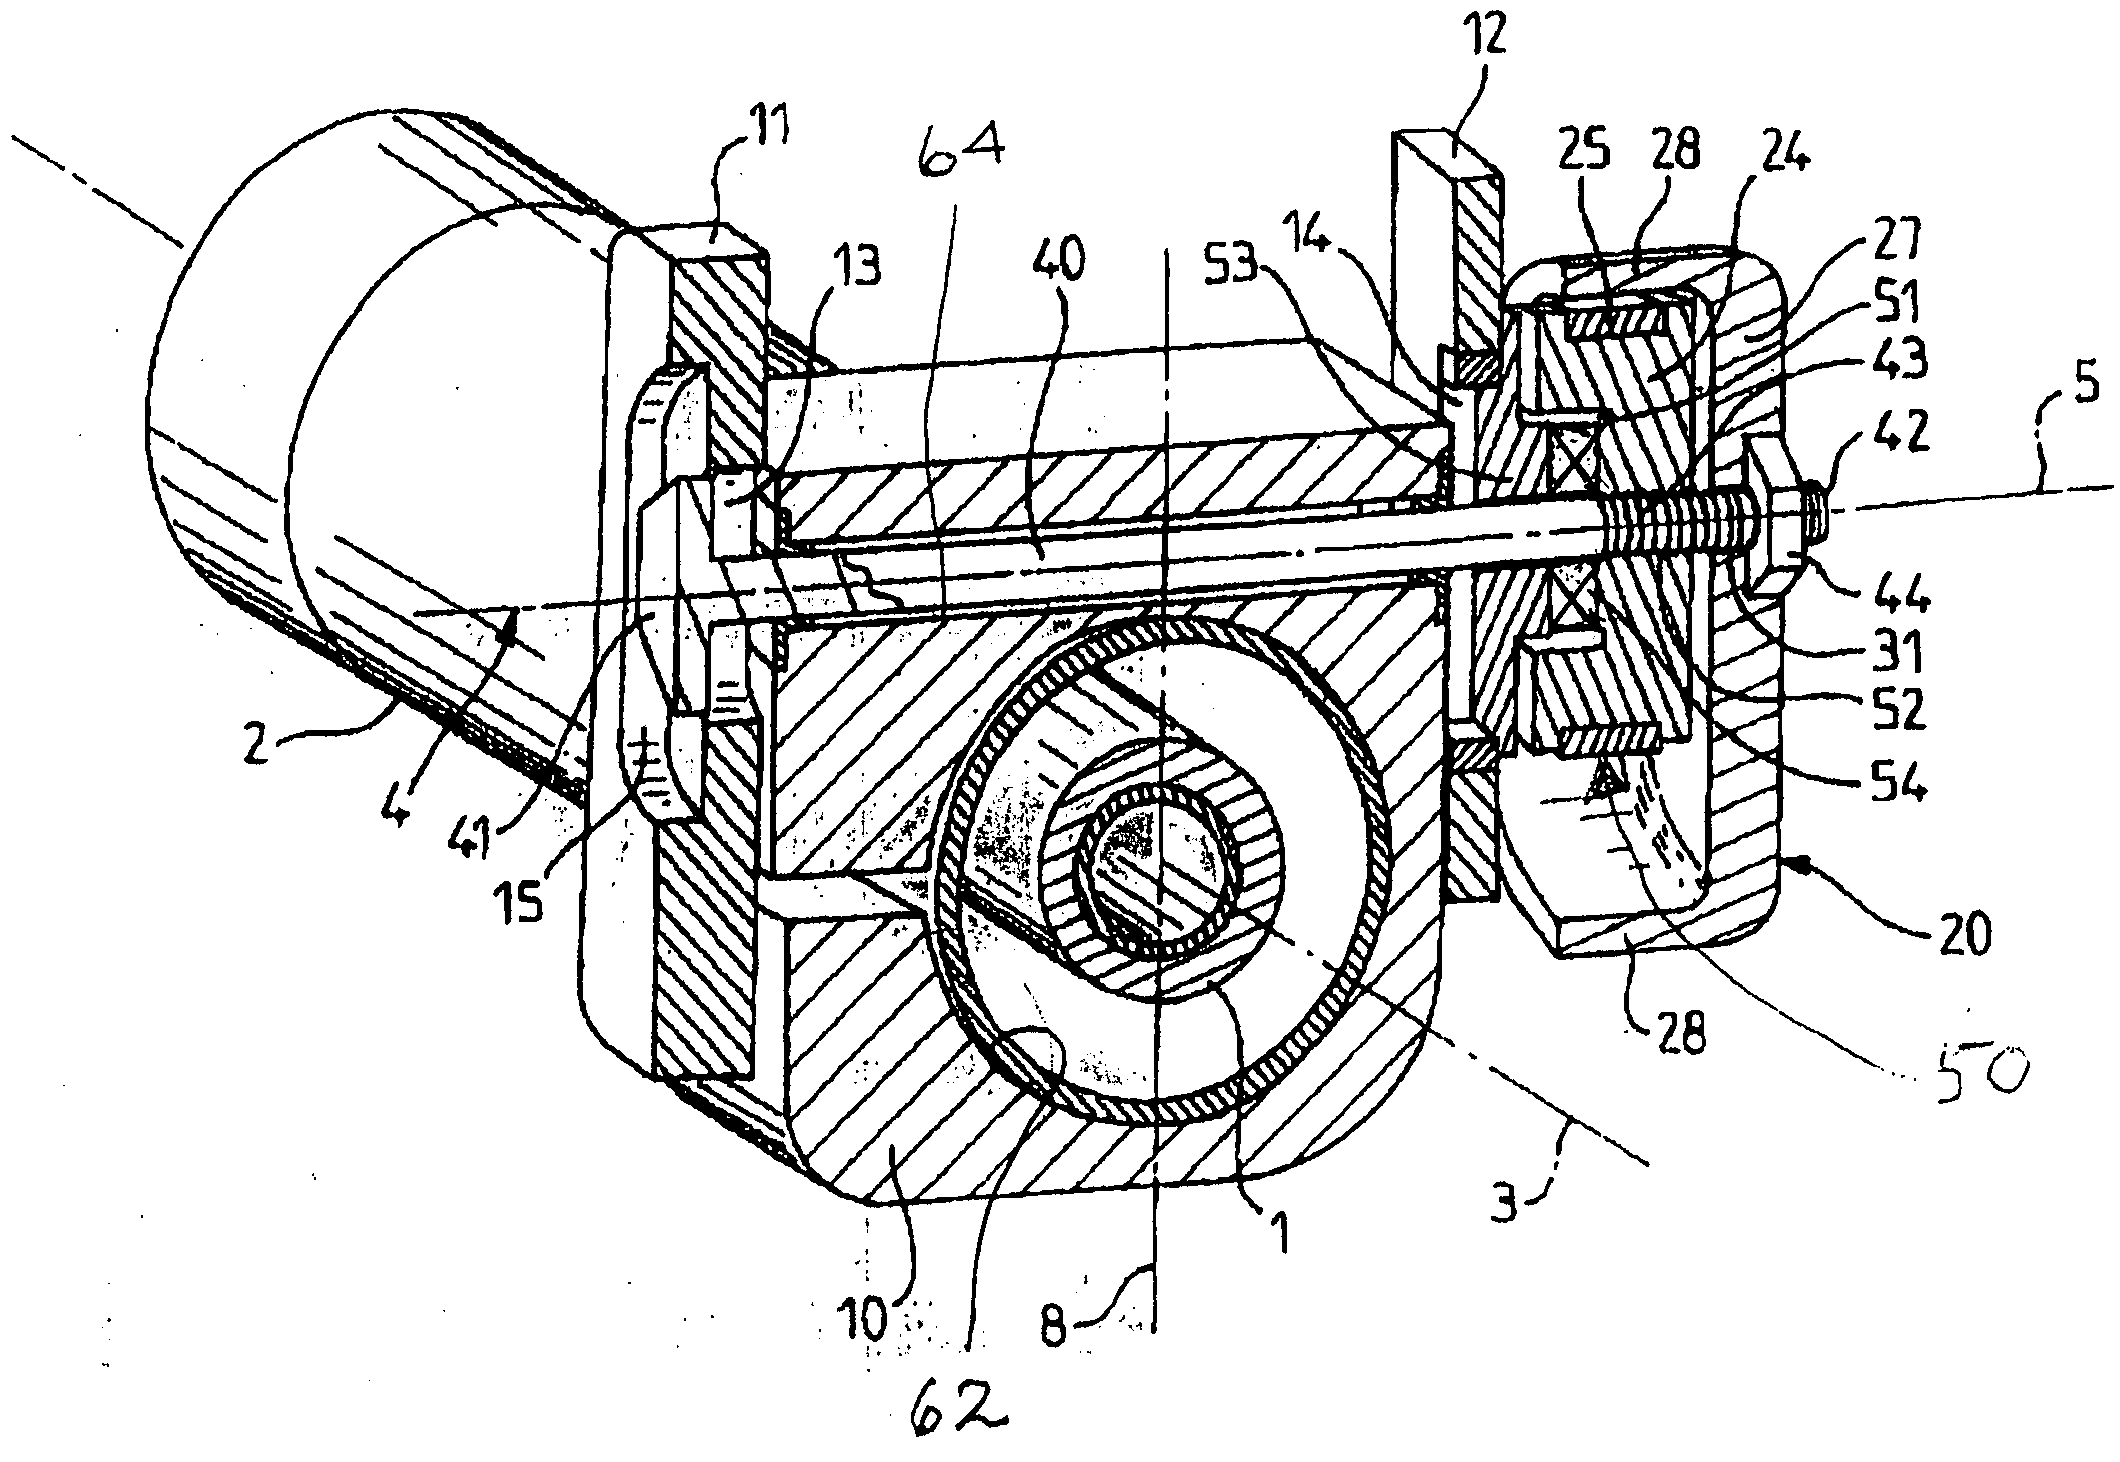 Adjustable steering column including electrically-operable locking means